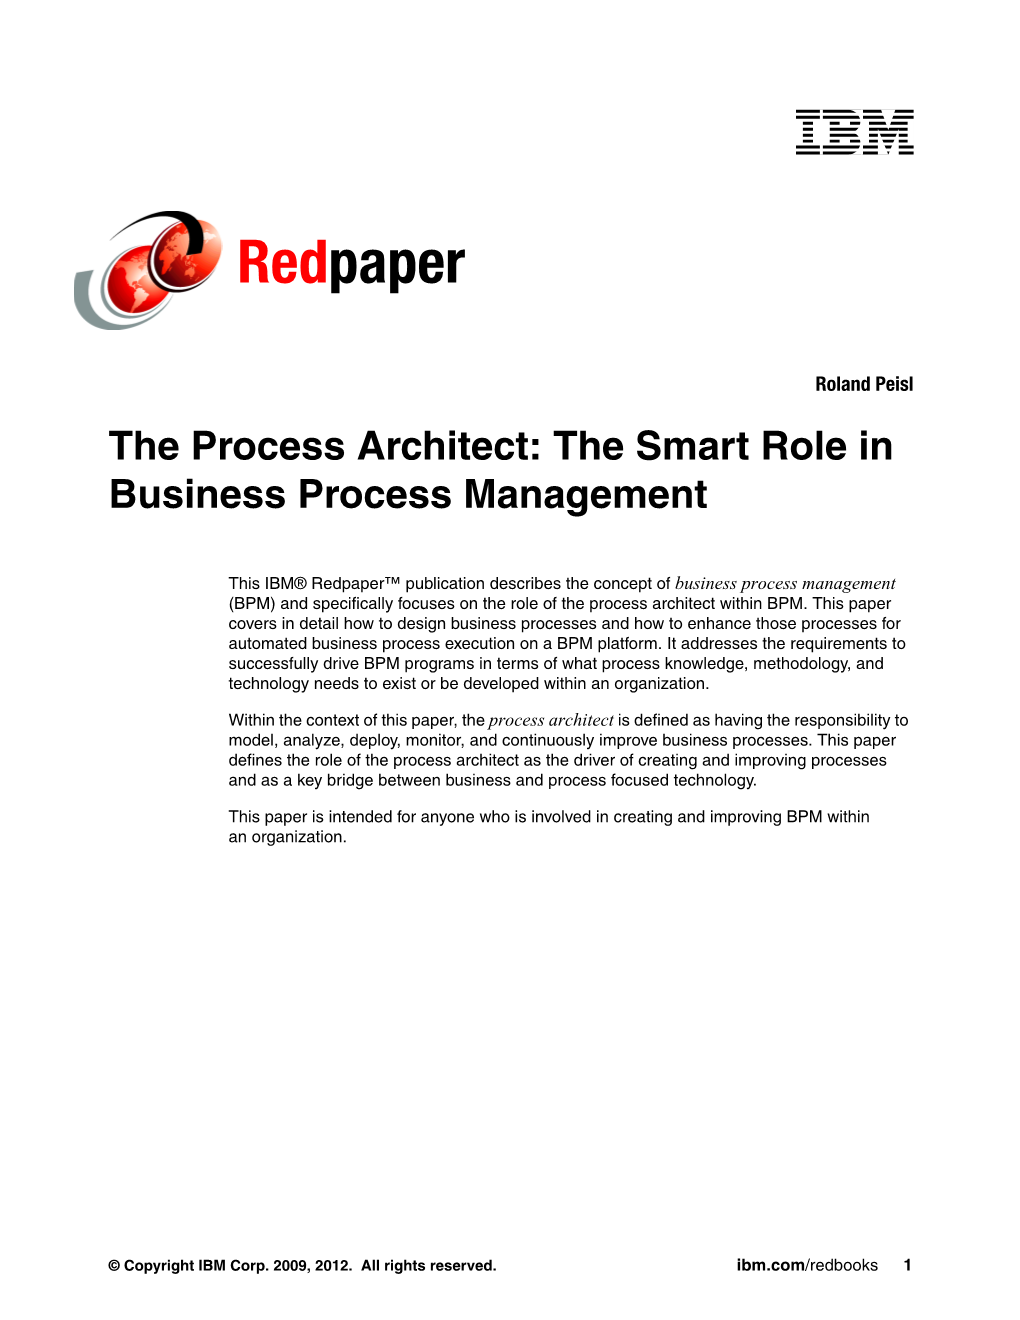 The Process Architect: the Smart Role in Business Process Management